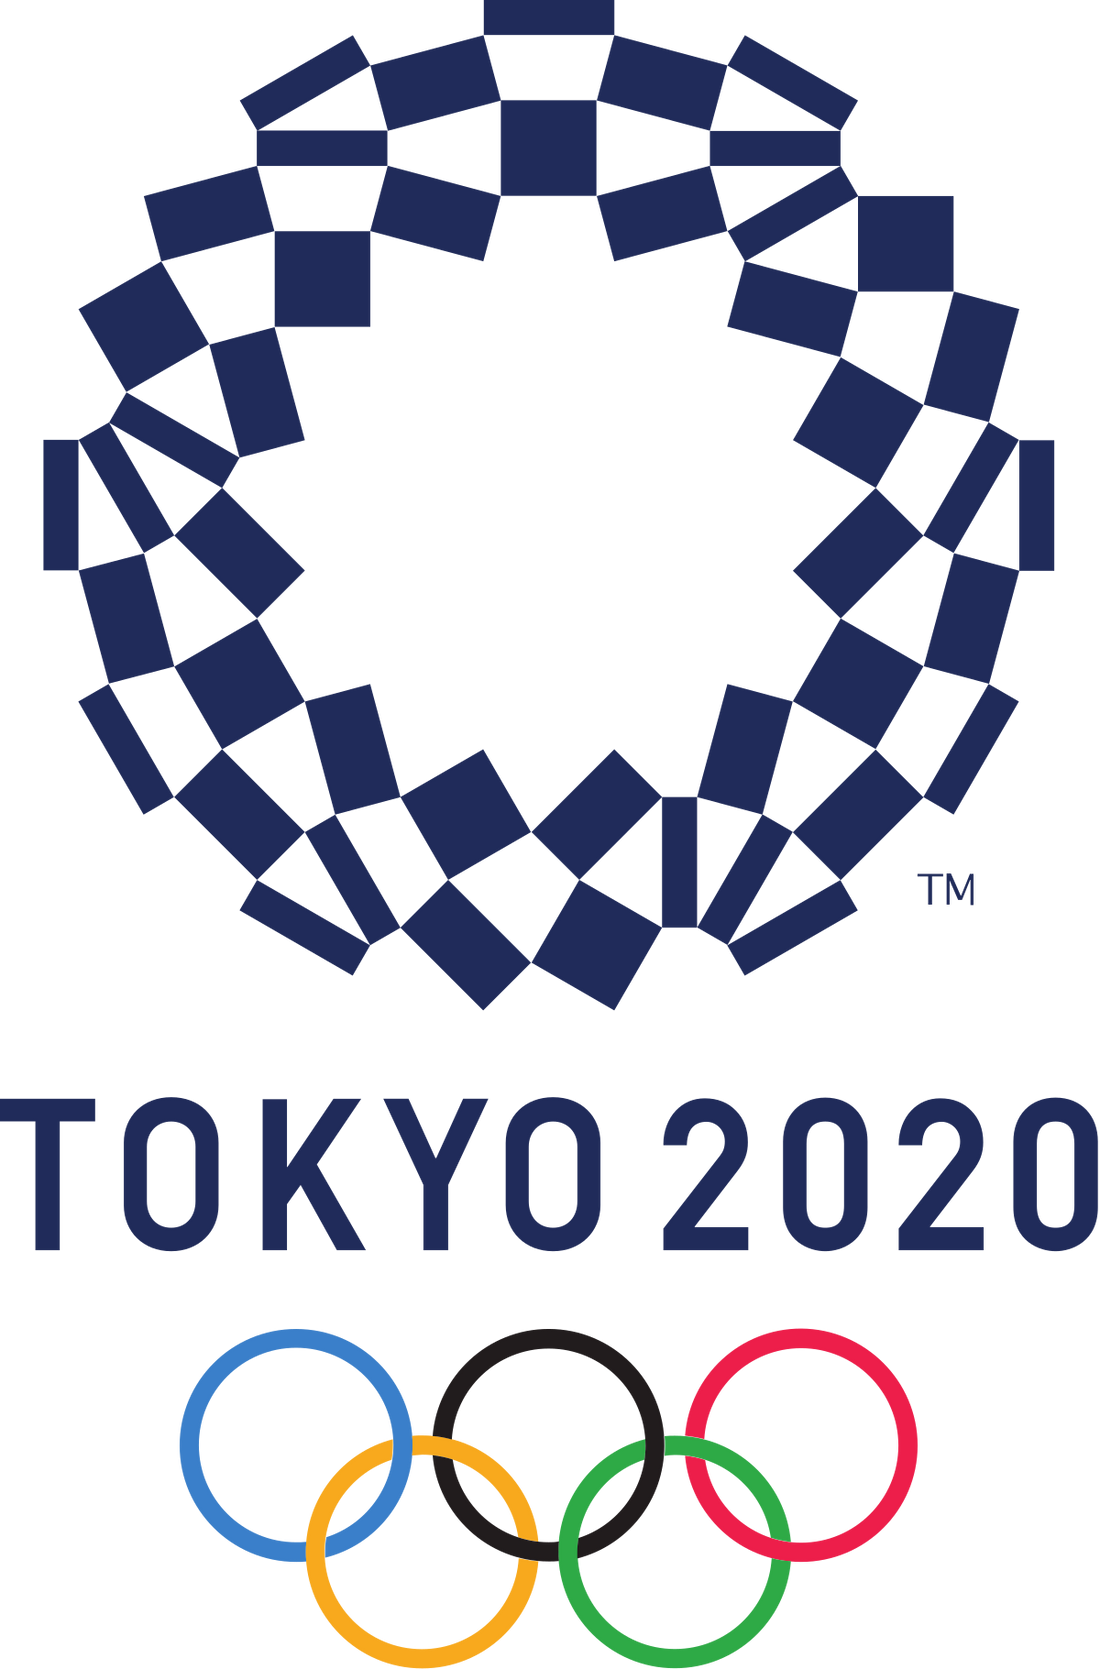 How to watch bike racing events in the 2021 Tokyo Olympics